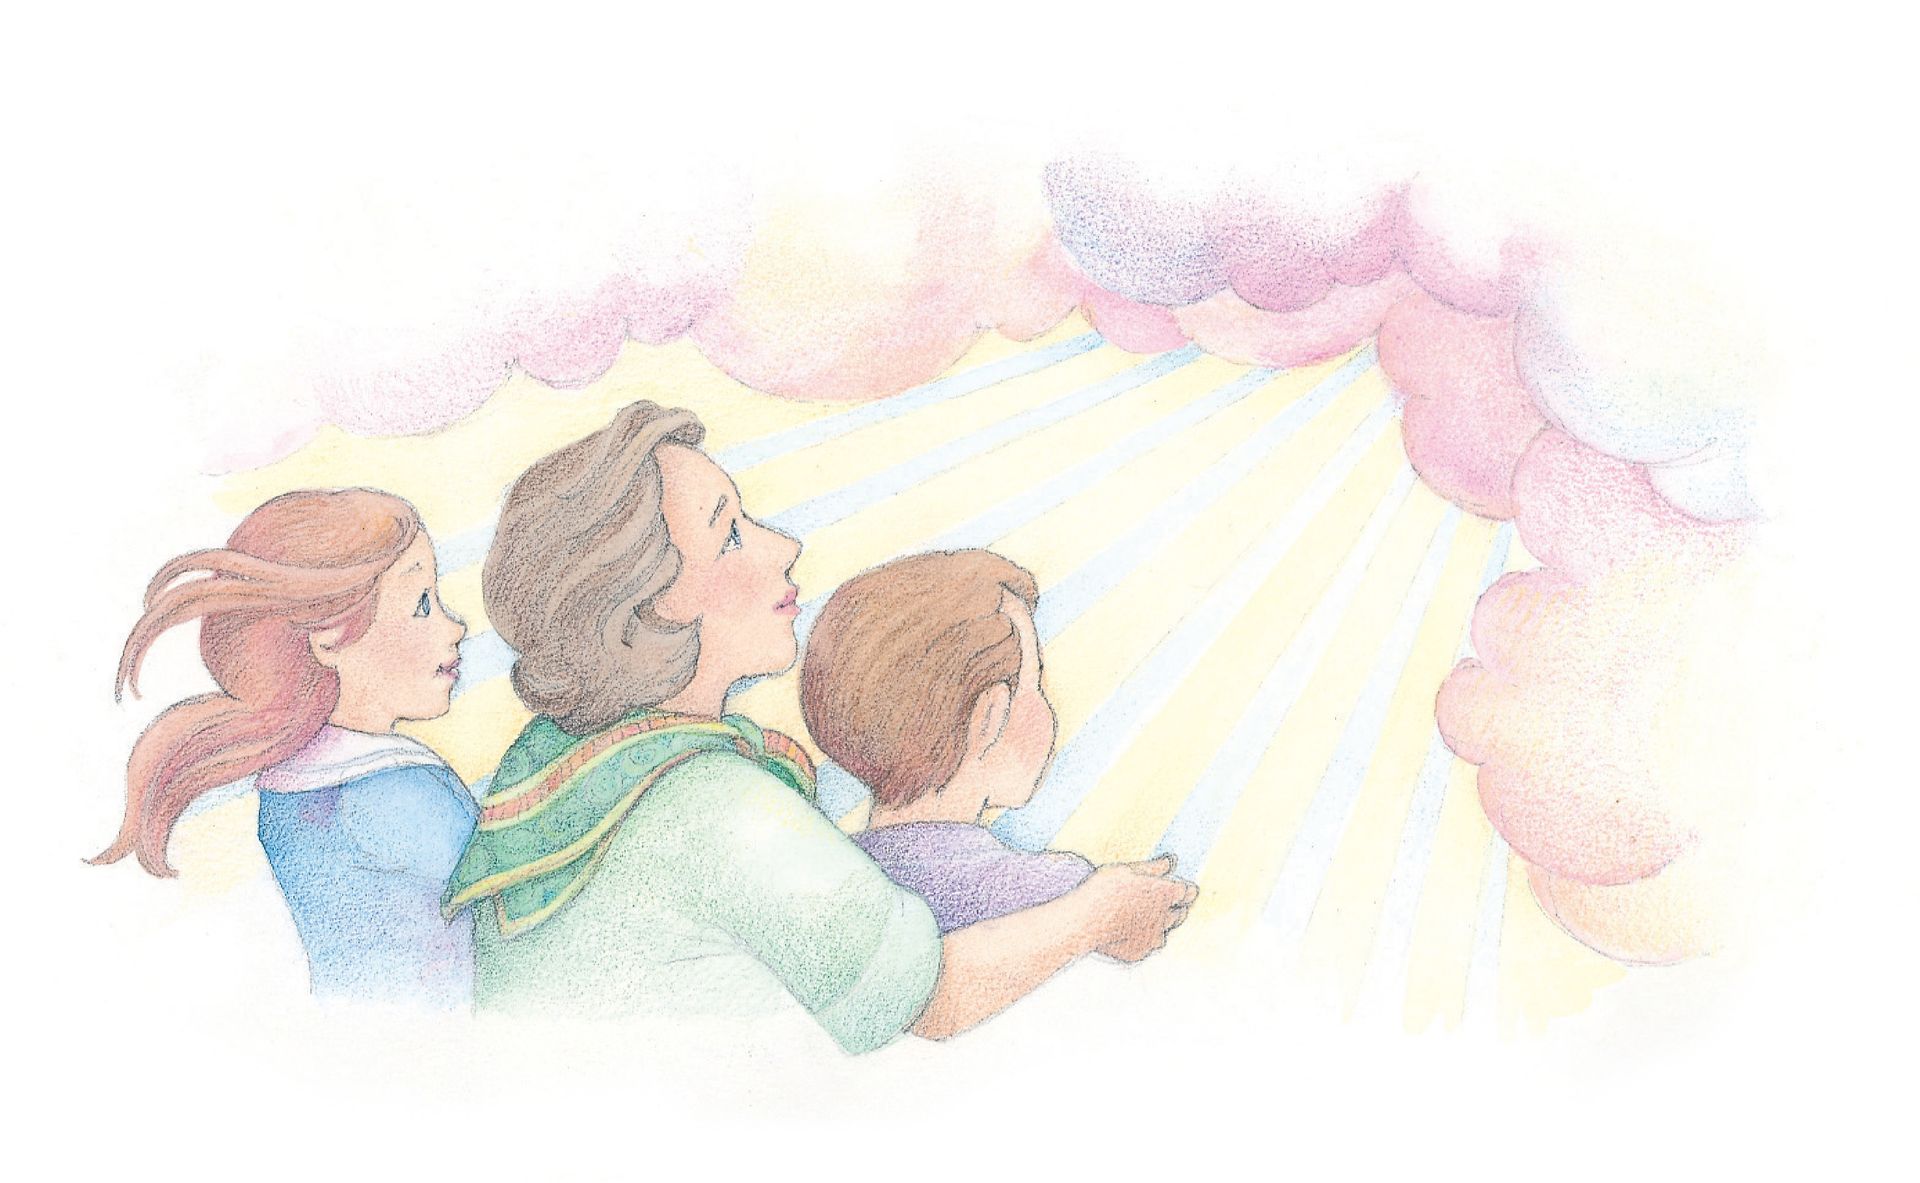 A woman and two children looking toward the sun. From the Children’s Songbook, page 176, “Tell Me, Dear Lord”; watercolor illustration by Phyllis Luch.